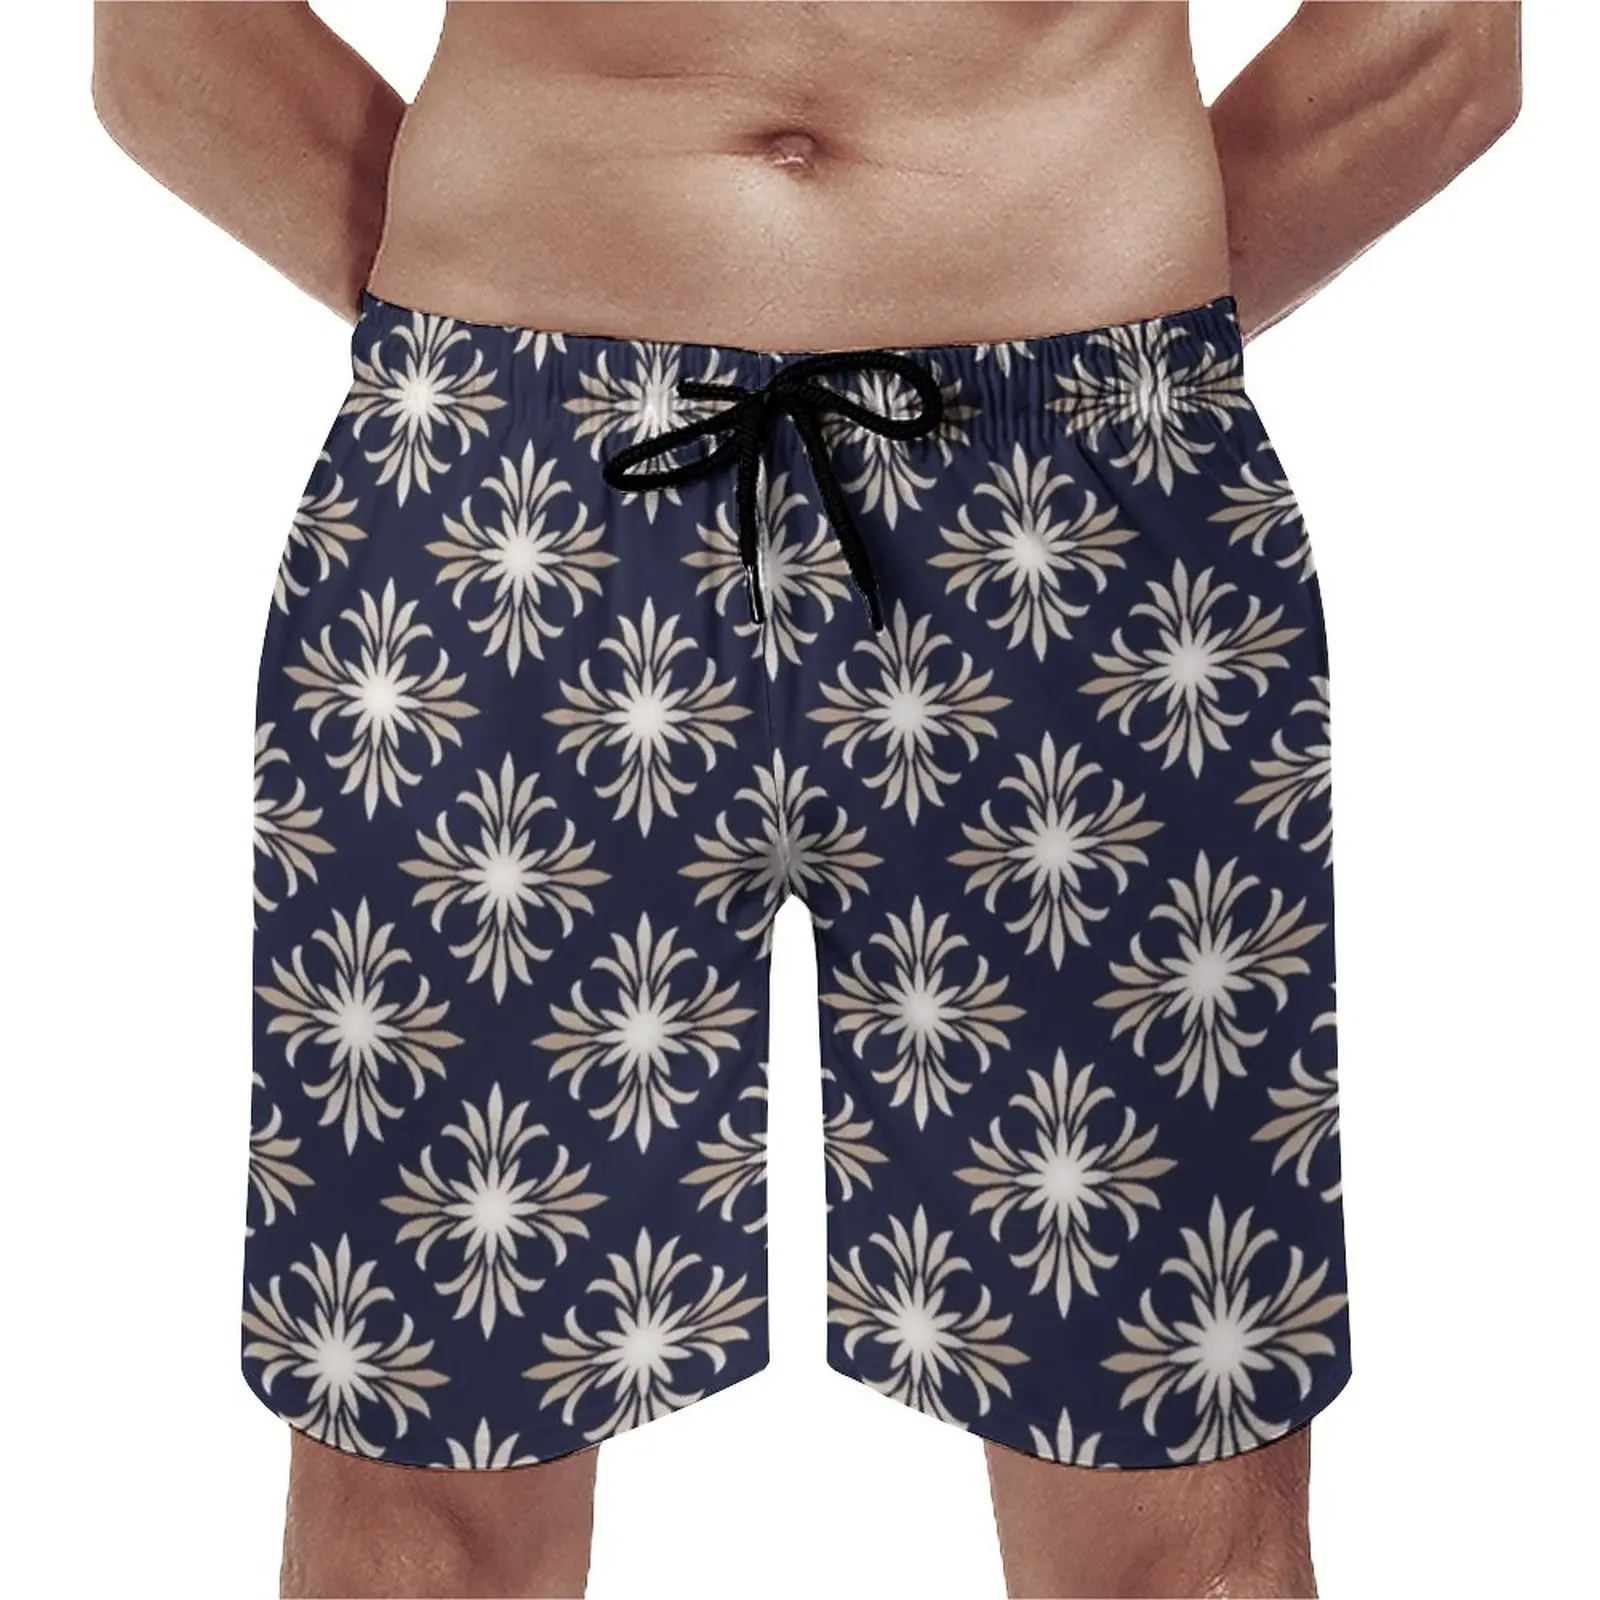 

Summer Gym Shorts Retro Baroque Floral Running Surf Bohemia Print Beach Short Pants Funny Fast Dry Swimming Trunks Plus Size